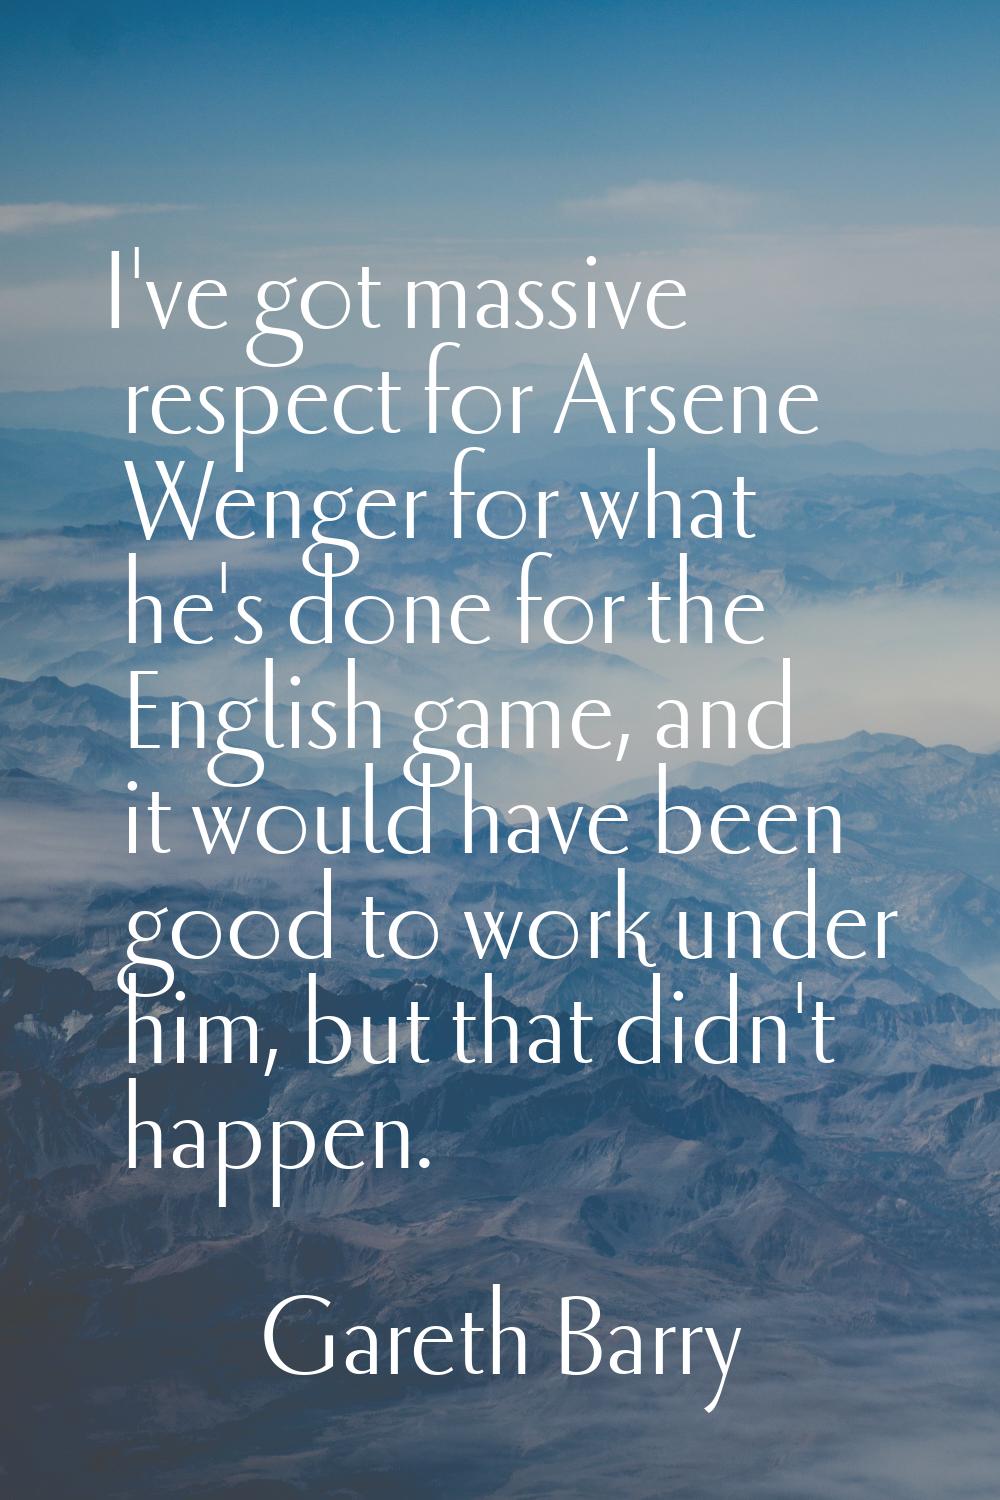 I've got massive respect for Arsene Wenger for what he's done for the English game, and it would ha